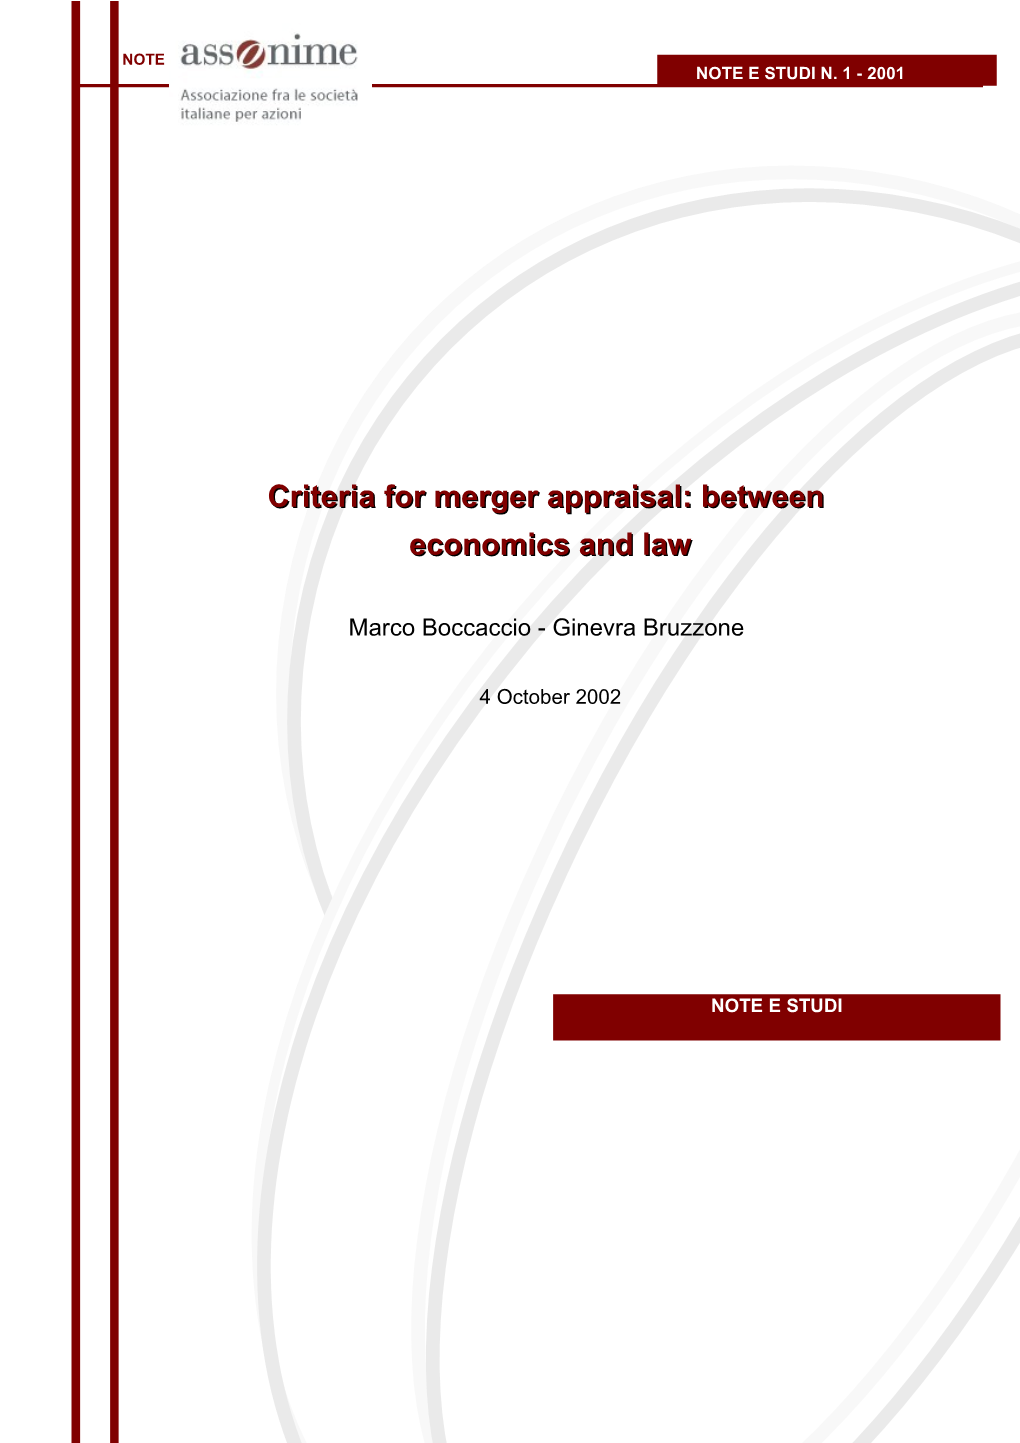 Assonime Criteria for Merger Appraisal: Between Economics and Law